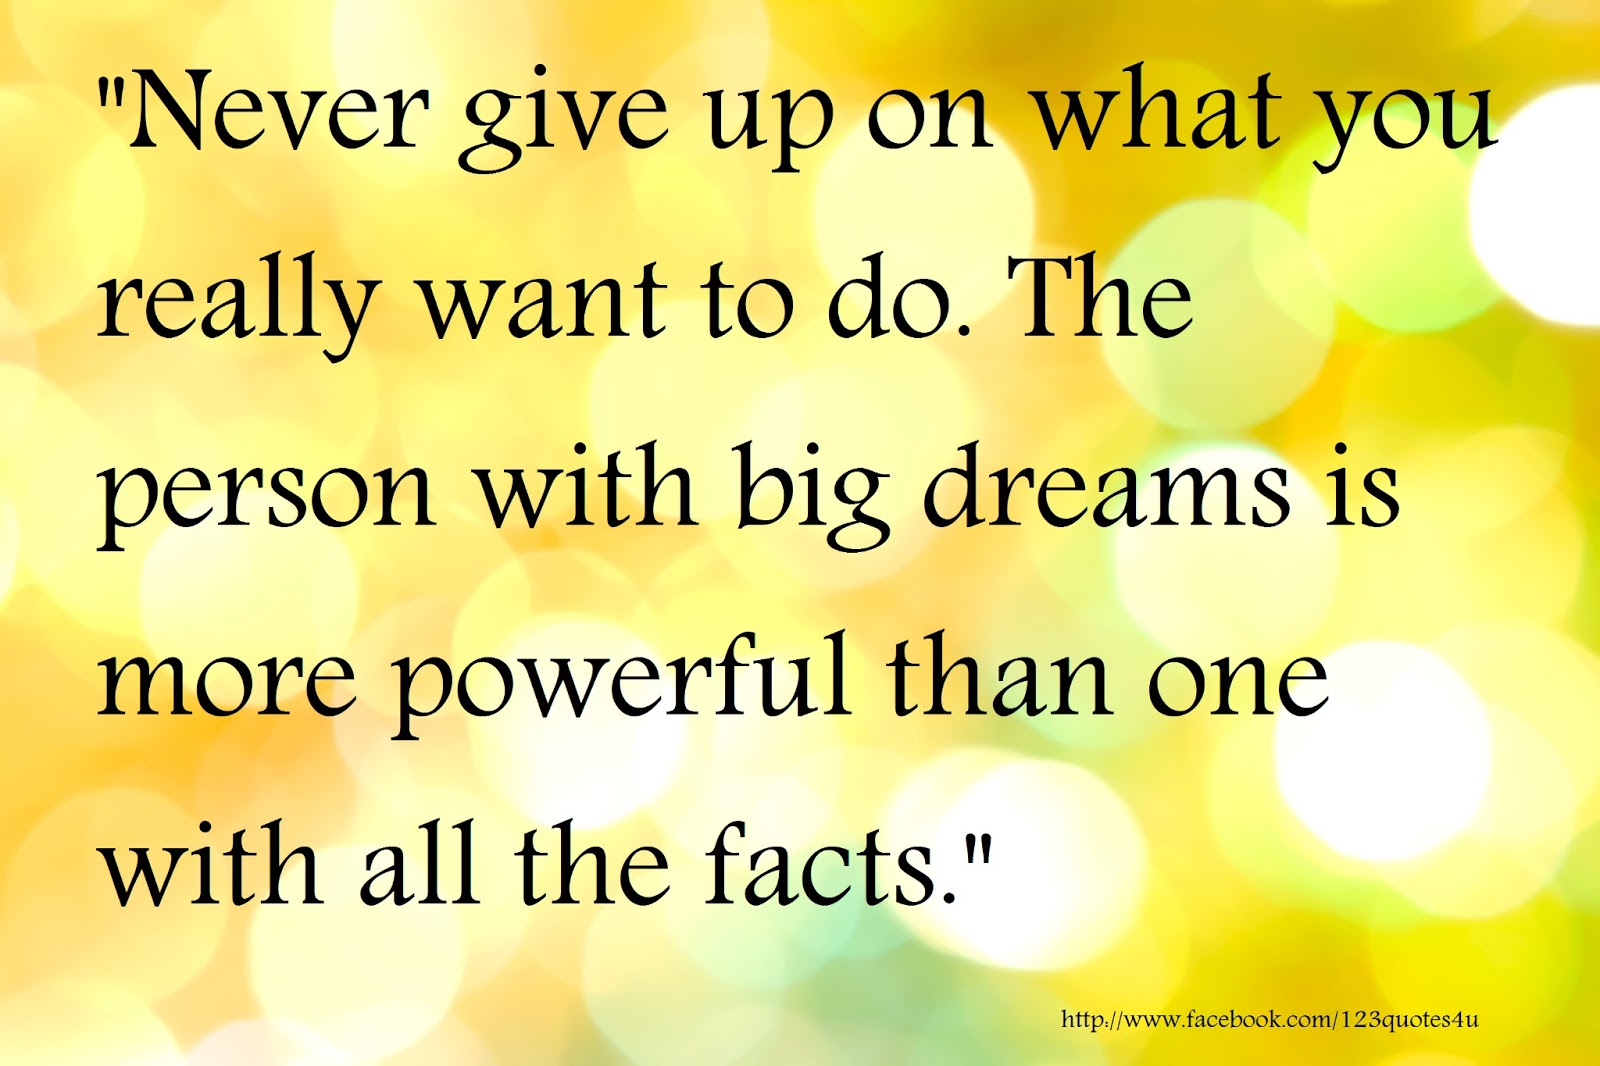 Quotes about life: “Never give up on what you really want to do. The ...